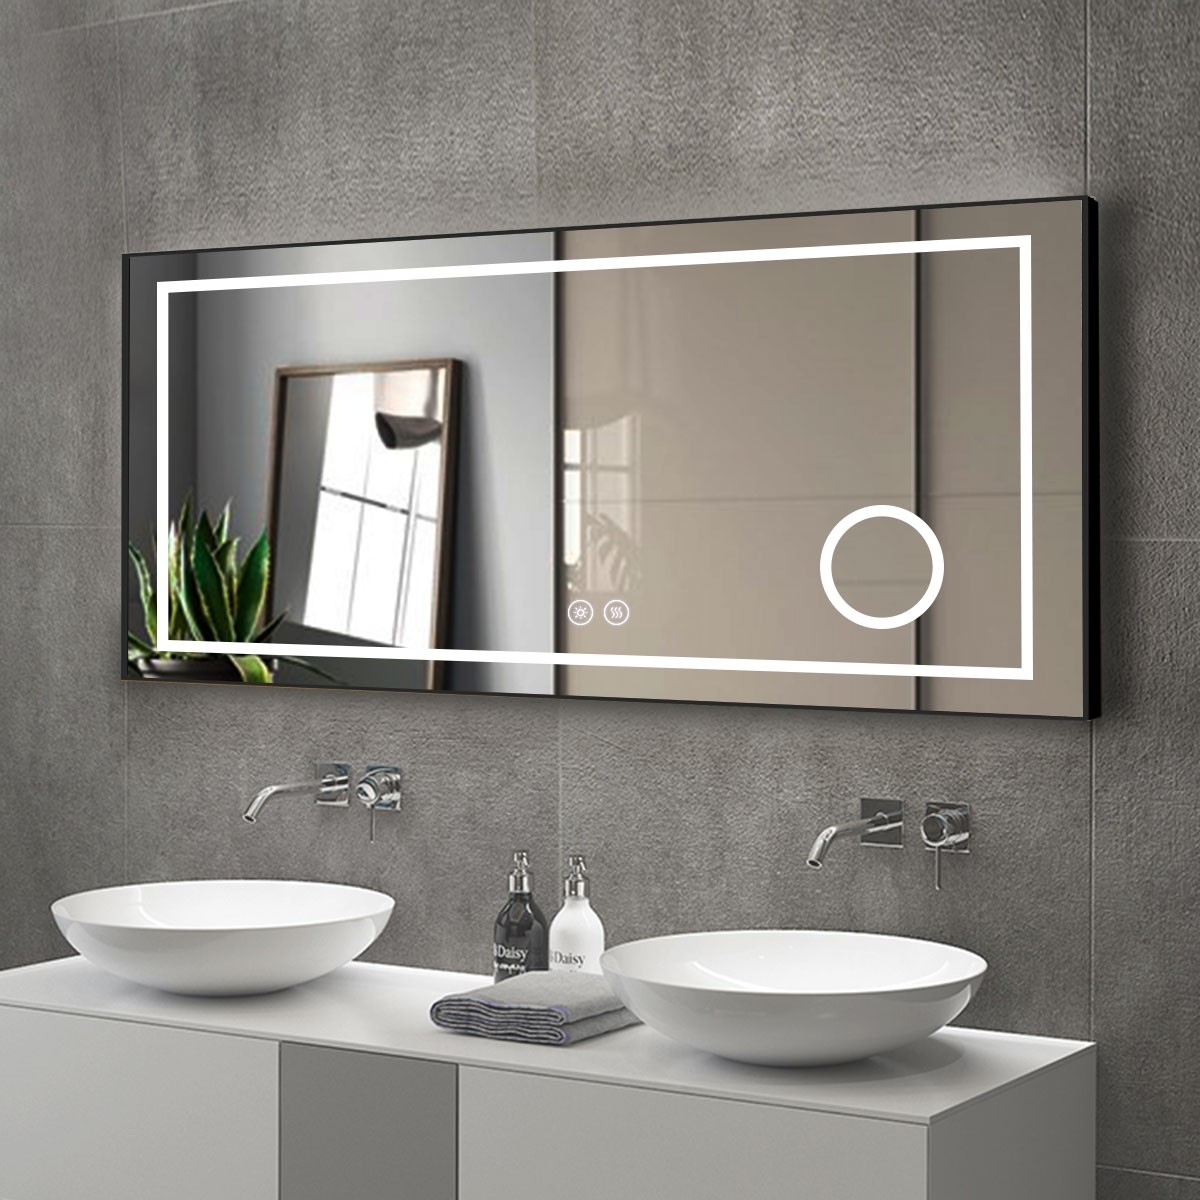 DECORAPORT 60 x 28 Inch LED Bathroom Mirror/Dress Mirror with Touch Button, Magnifier, Anti Fog, Dimmable, Horizontal Mount (D621-6028C)